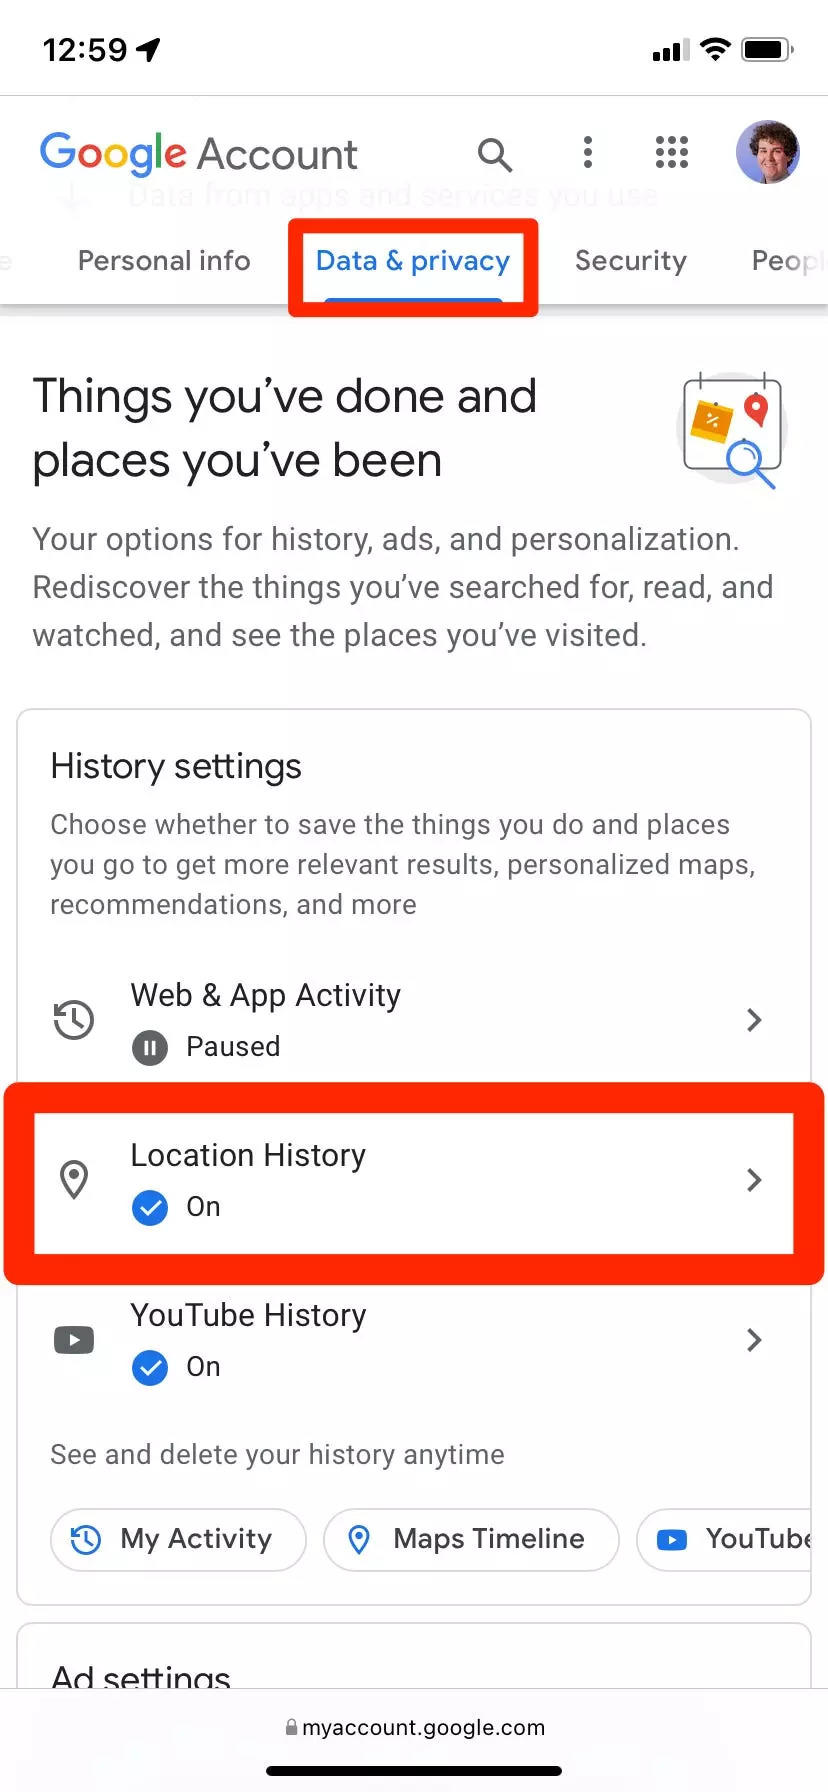 How to check your Google Maps timeline and see every place you've traveled